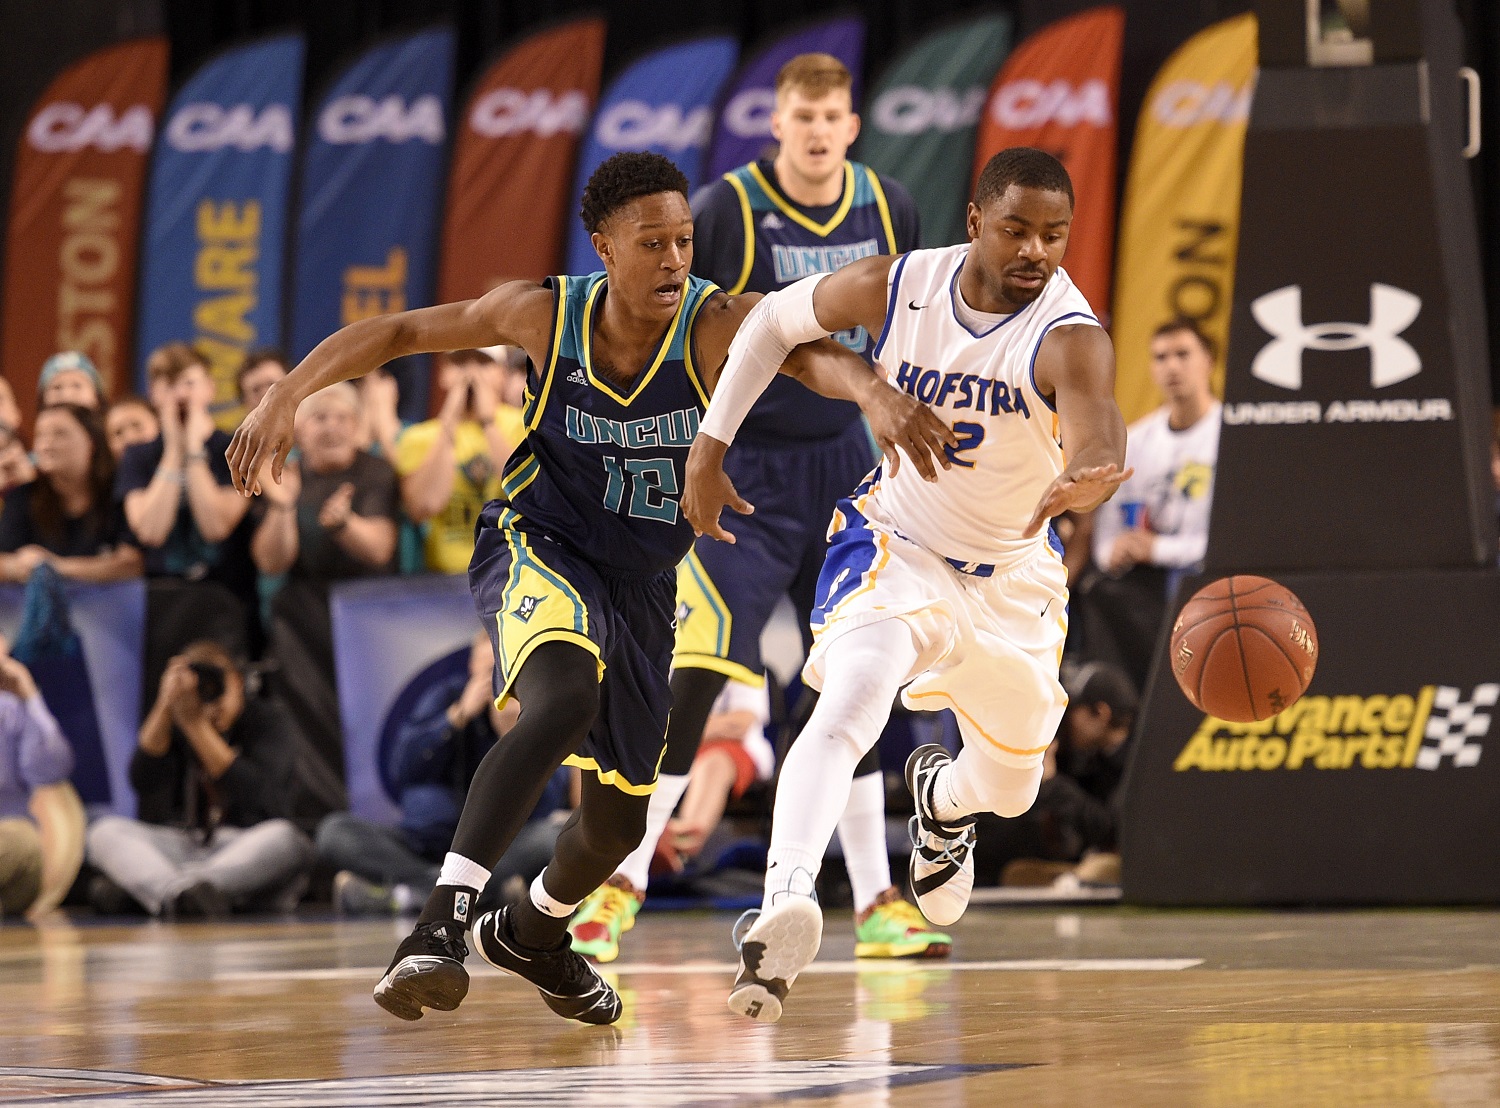 UNC Wilmington guard C.J. Bryce, left, and Hofstra guard Ameen Tanksley (2) chase after the ball during the first half of an NCAA college basketball game in the Colonial Athletic Association championship, Monday, March 7, 2016, in Baltimore. (AP Photo/Nick Wass)